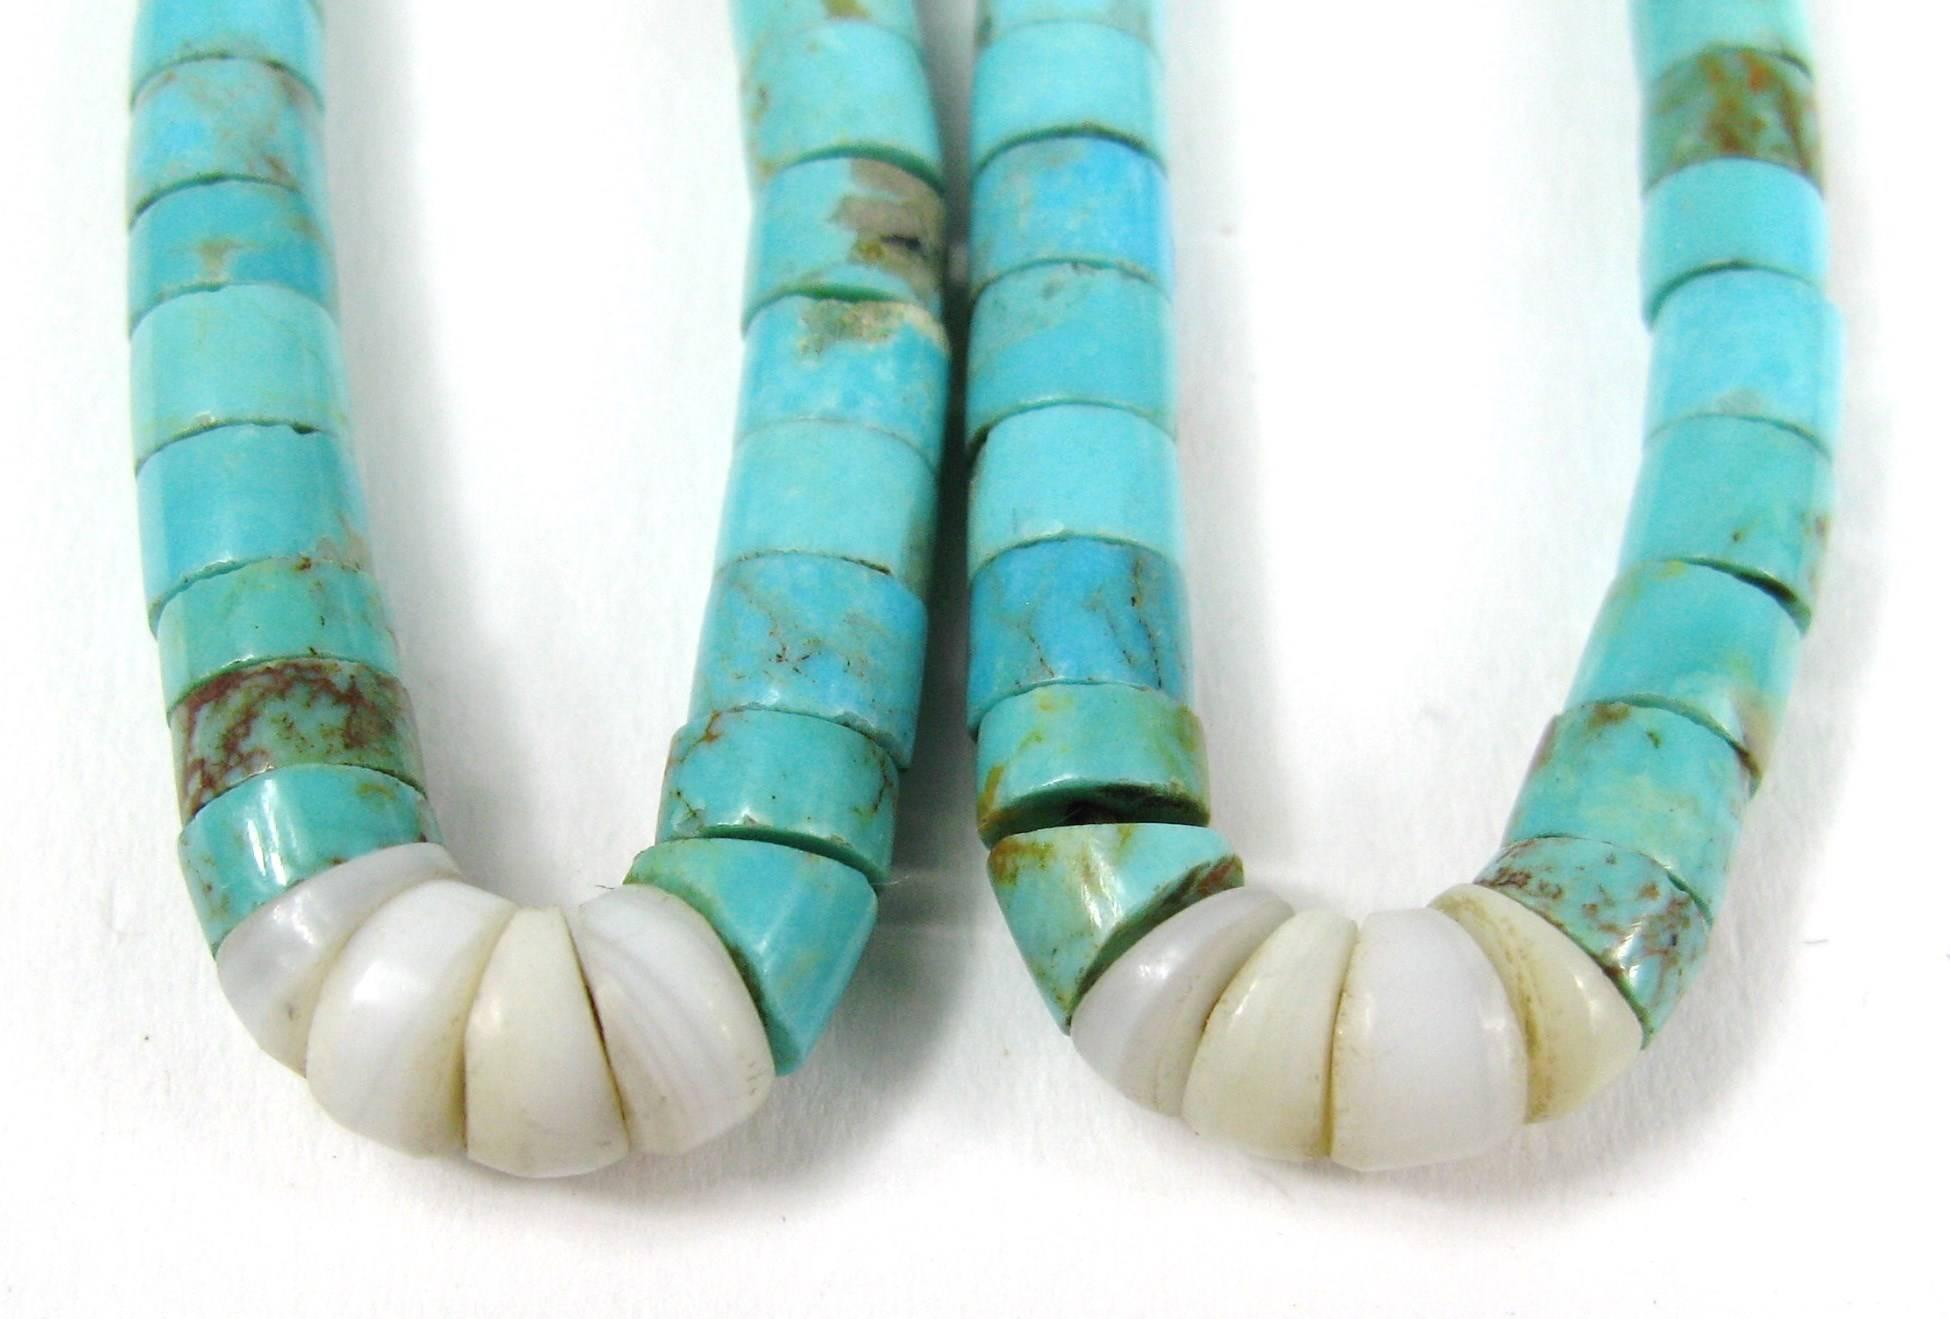 Large Native American Zuni Turquoise and Shell Earrings Sterling Silver measuring 5.25 inches long not including the finding. Beads measure 5.10mm down to 2.4mm. This is out of a massive collection of Hopi, Zuni, Navajo, Southwestern and sterling